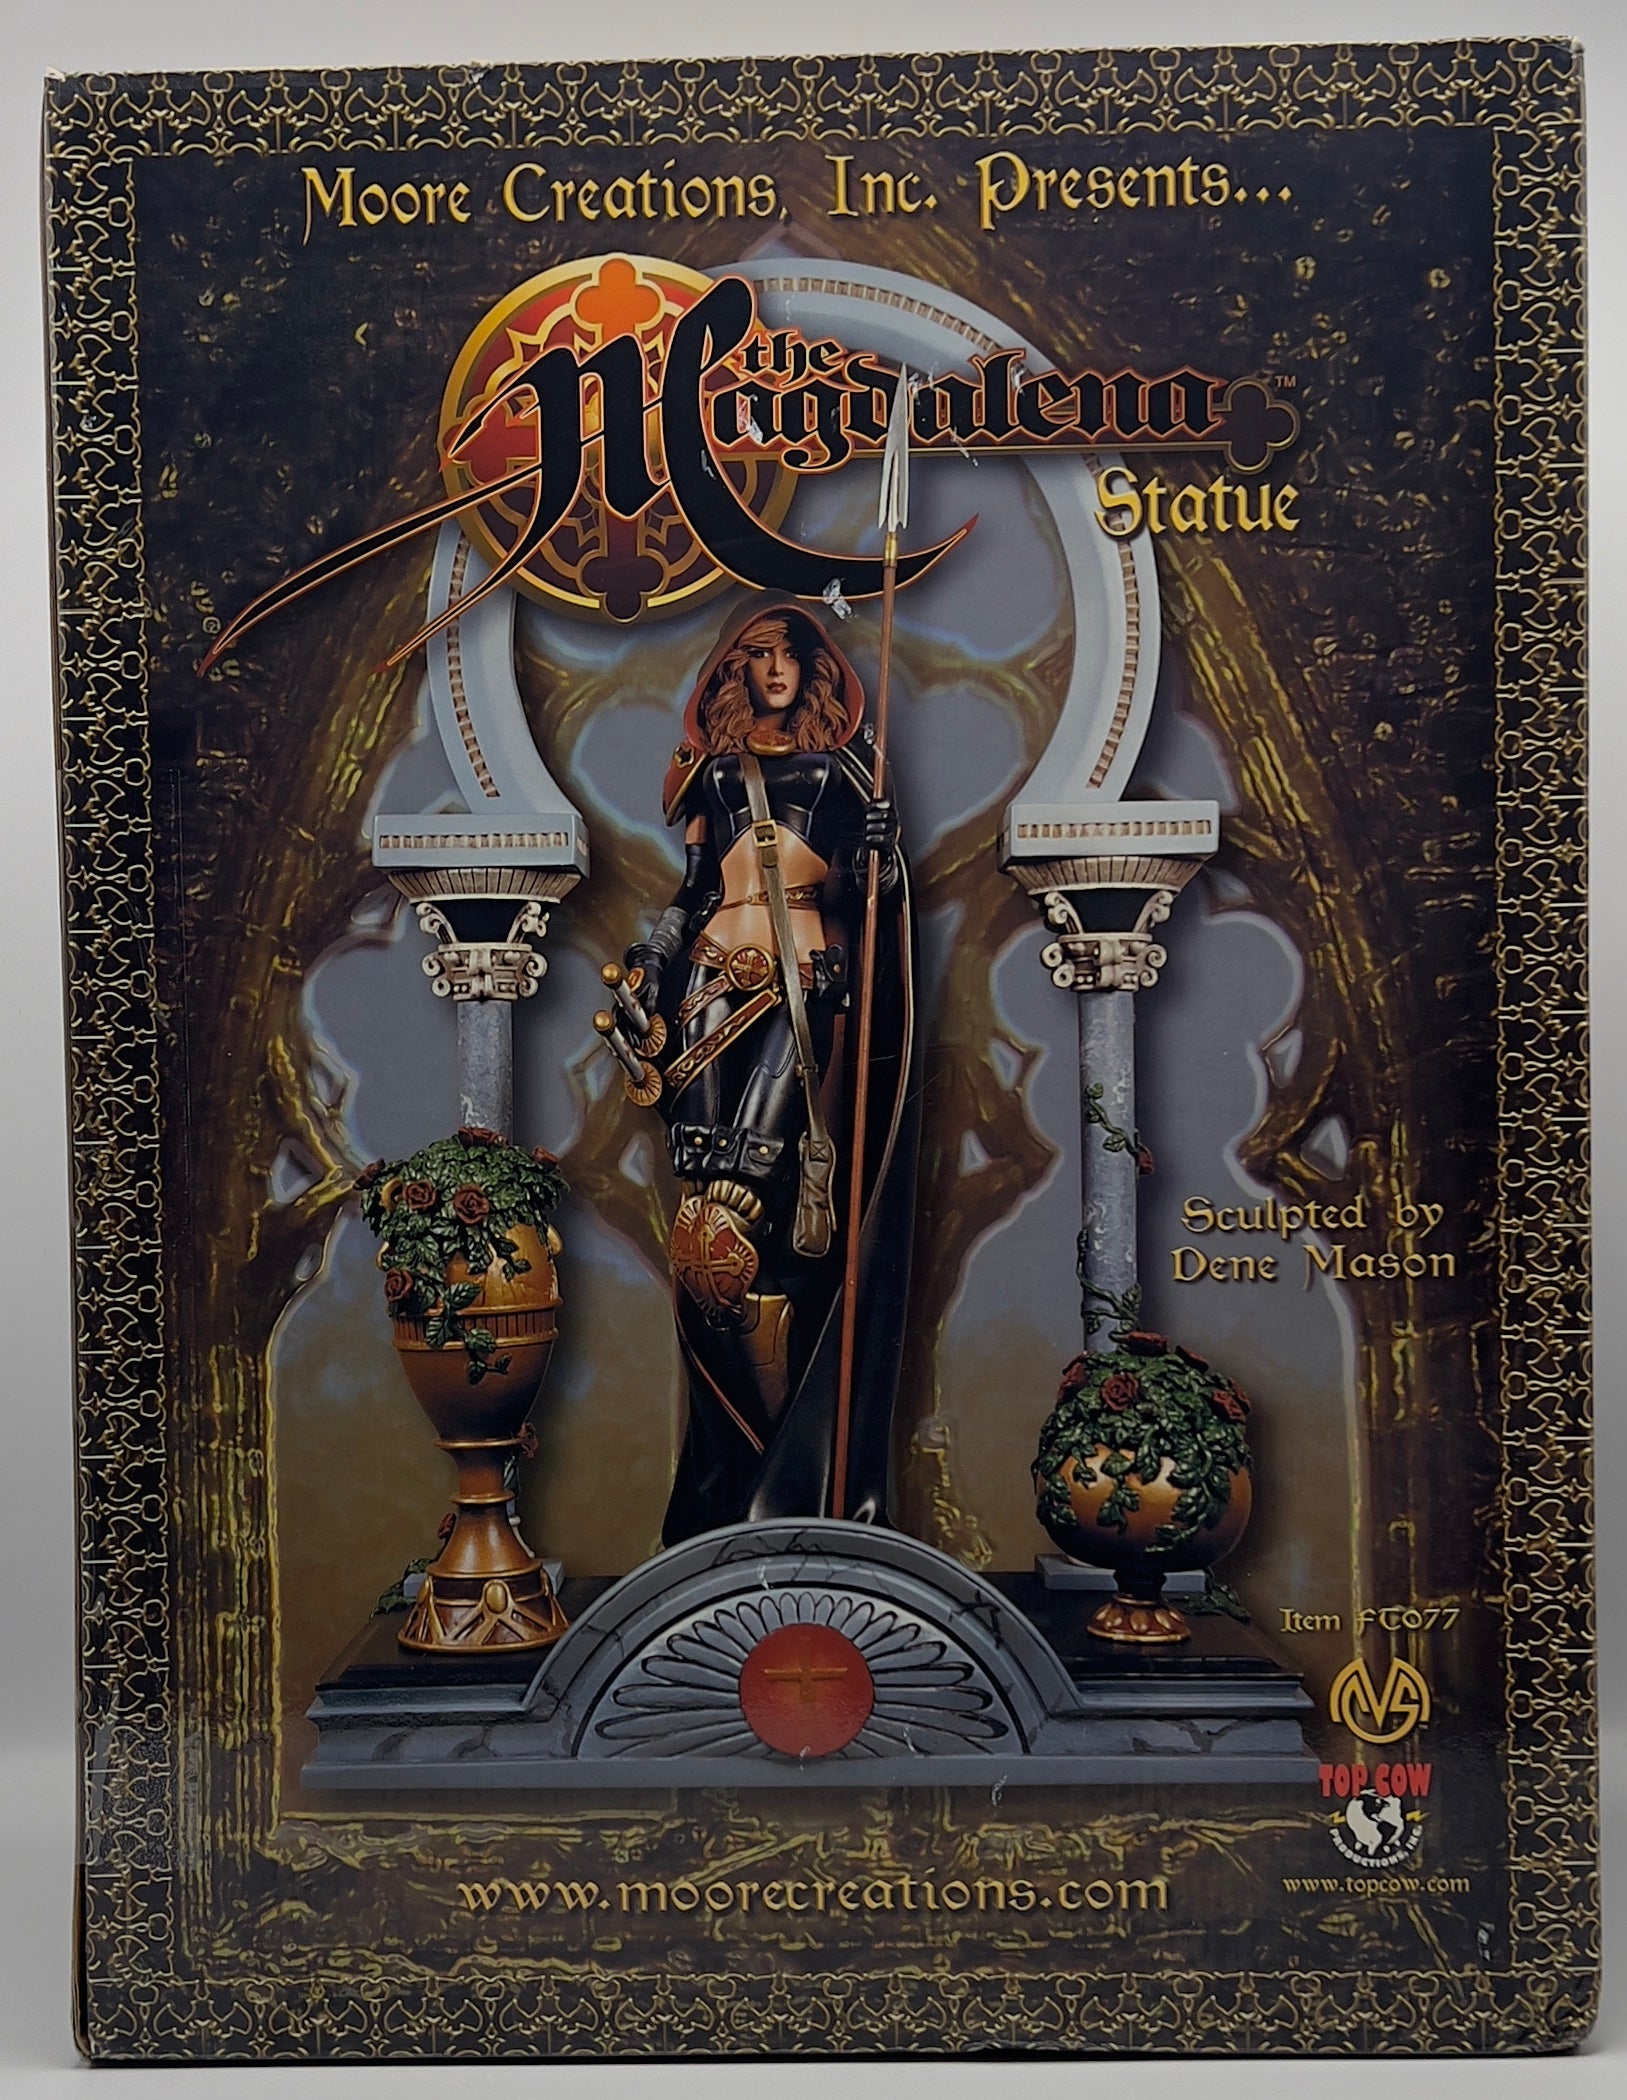 The Magdalena Statue by Moore Creations Inc and Top Cow